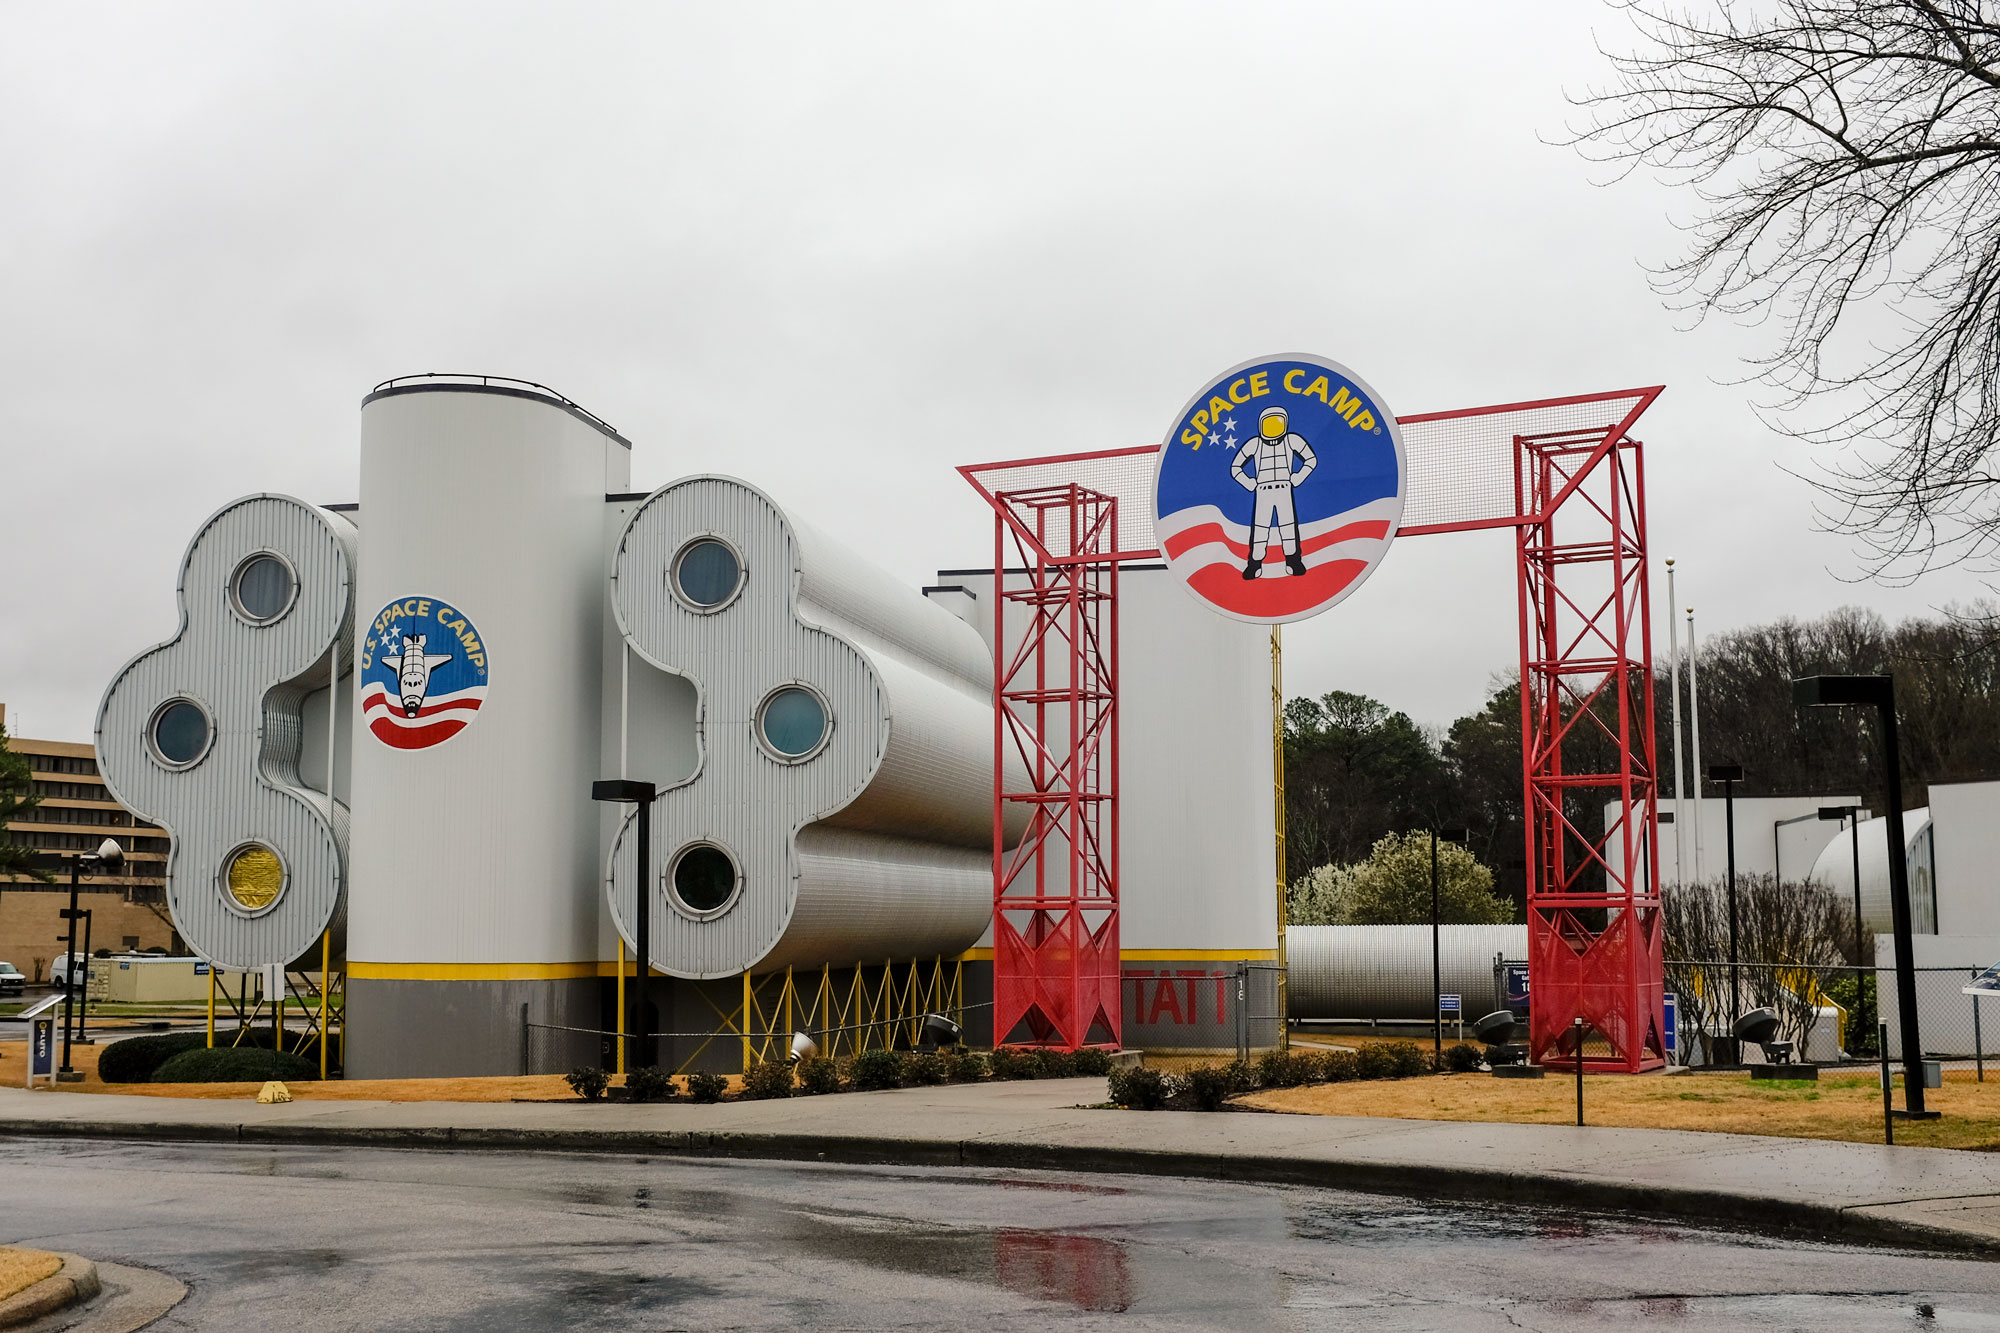 Space Camp at the U.S. Space & Rocket Center